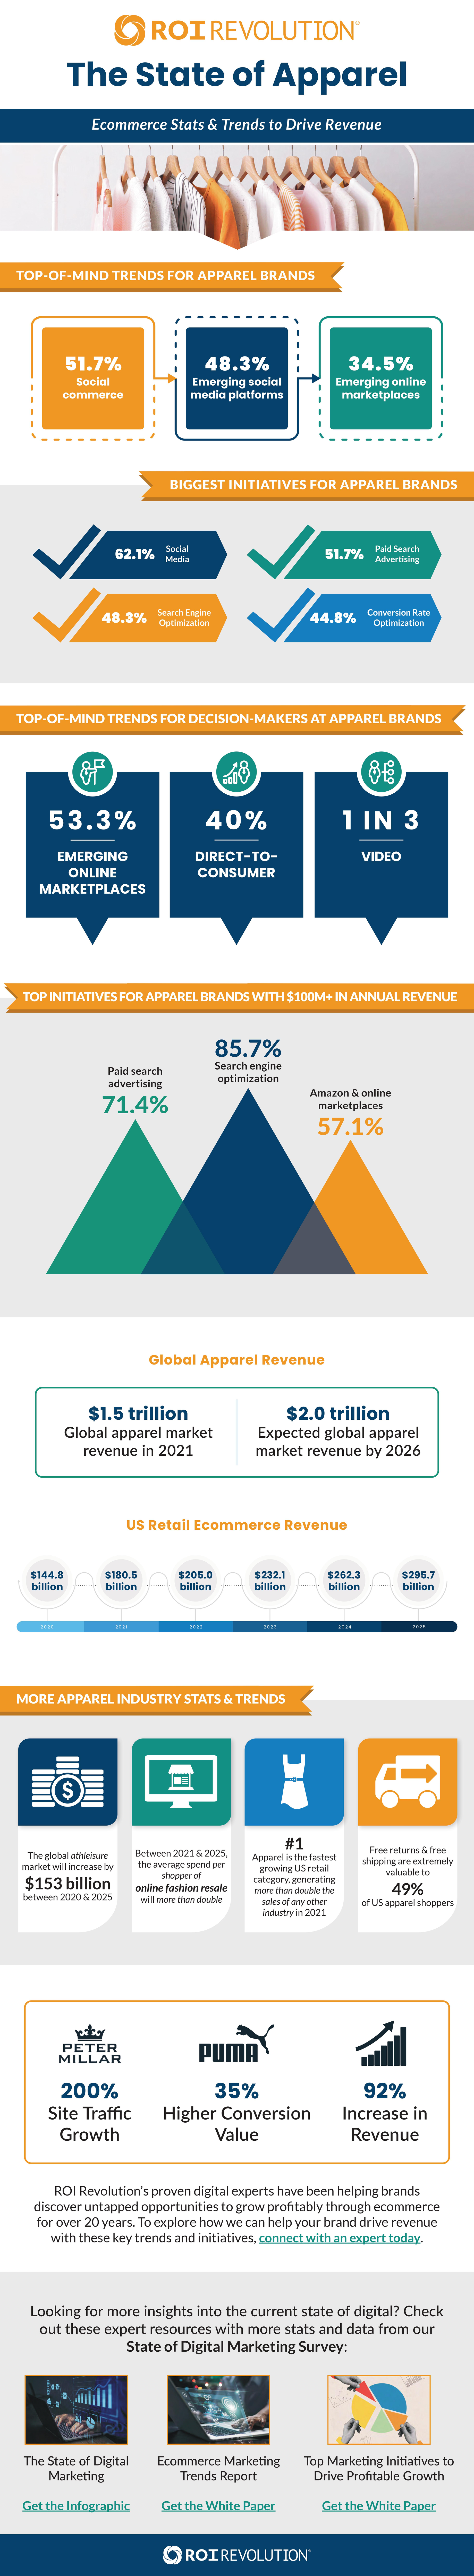 Statistics & Facts on the U.S. Apparel Industry